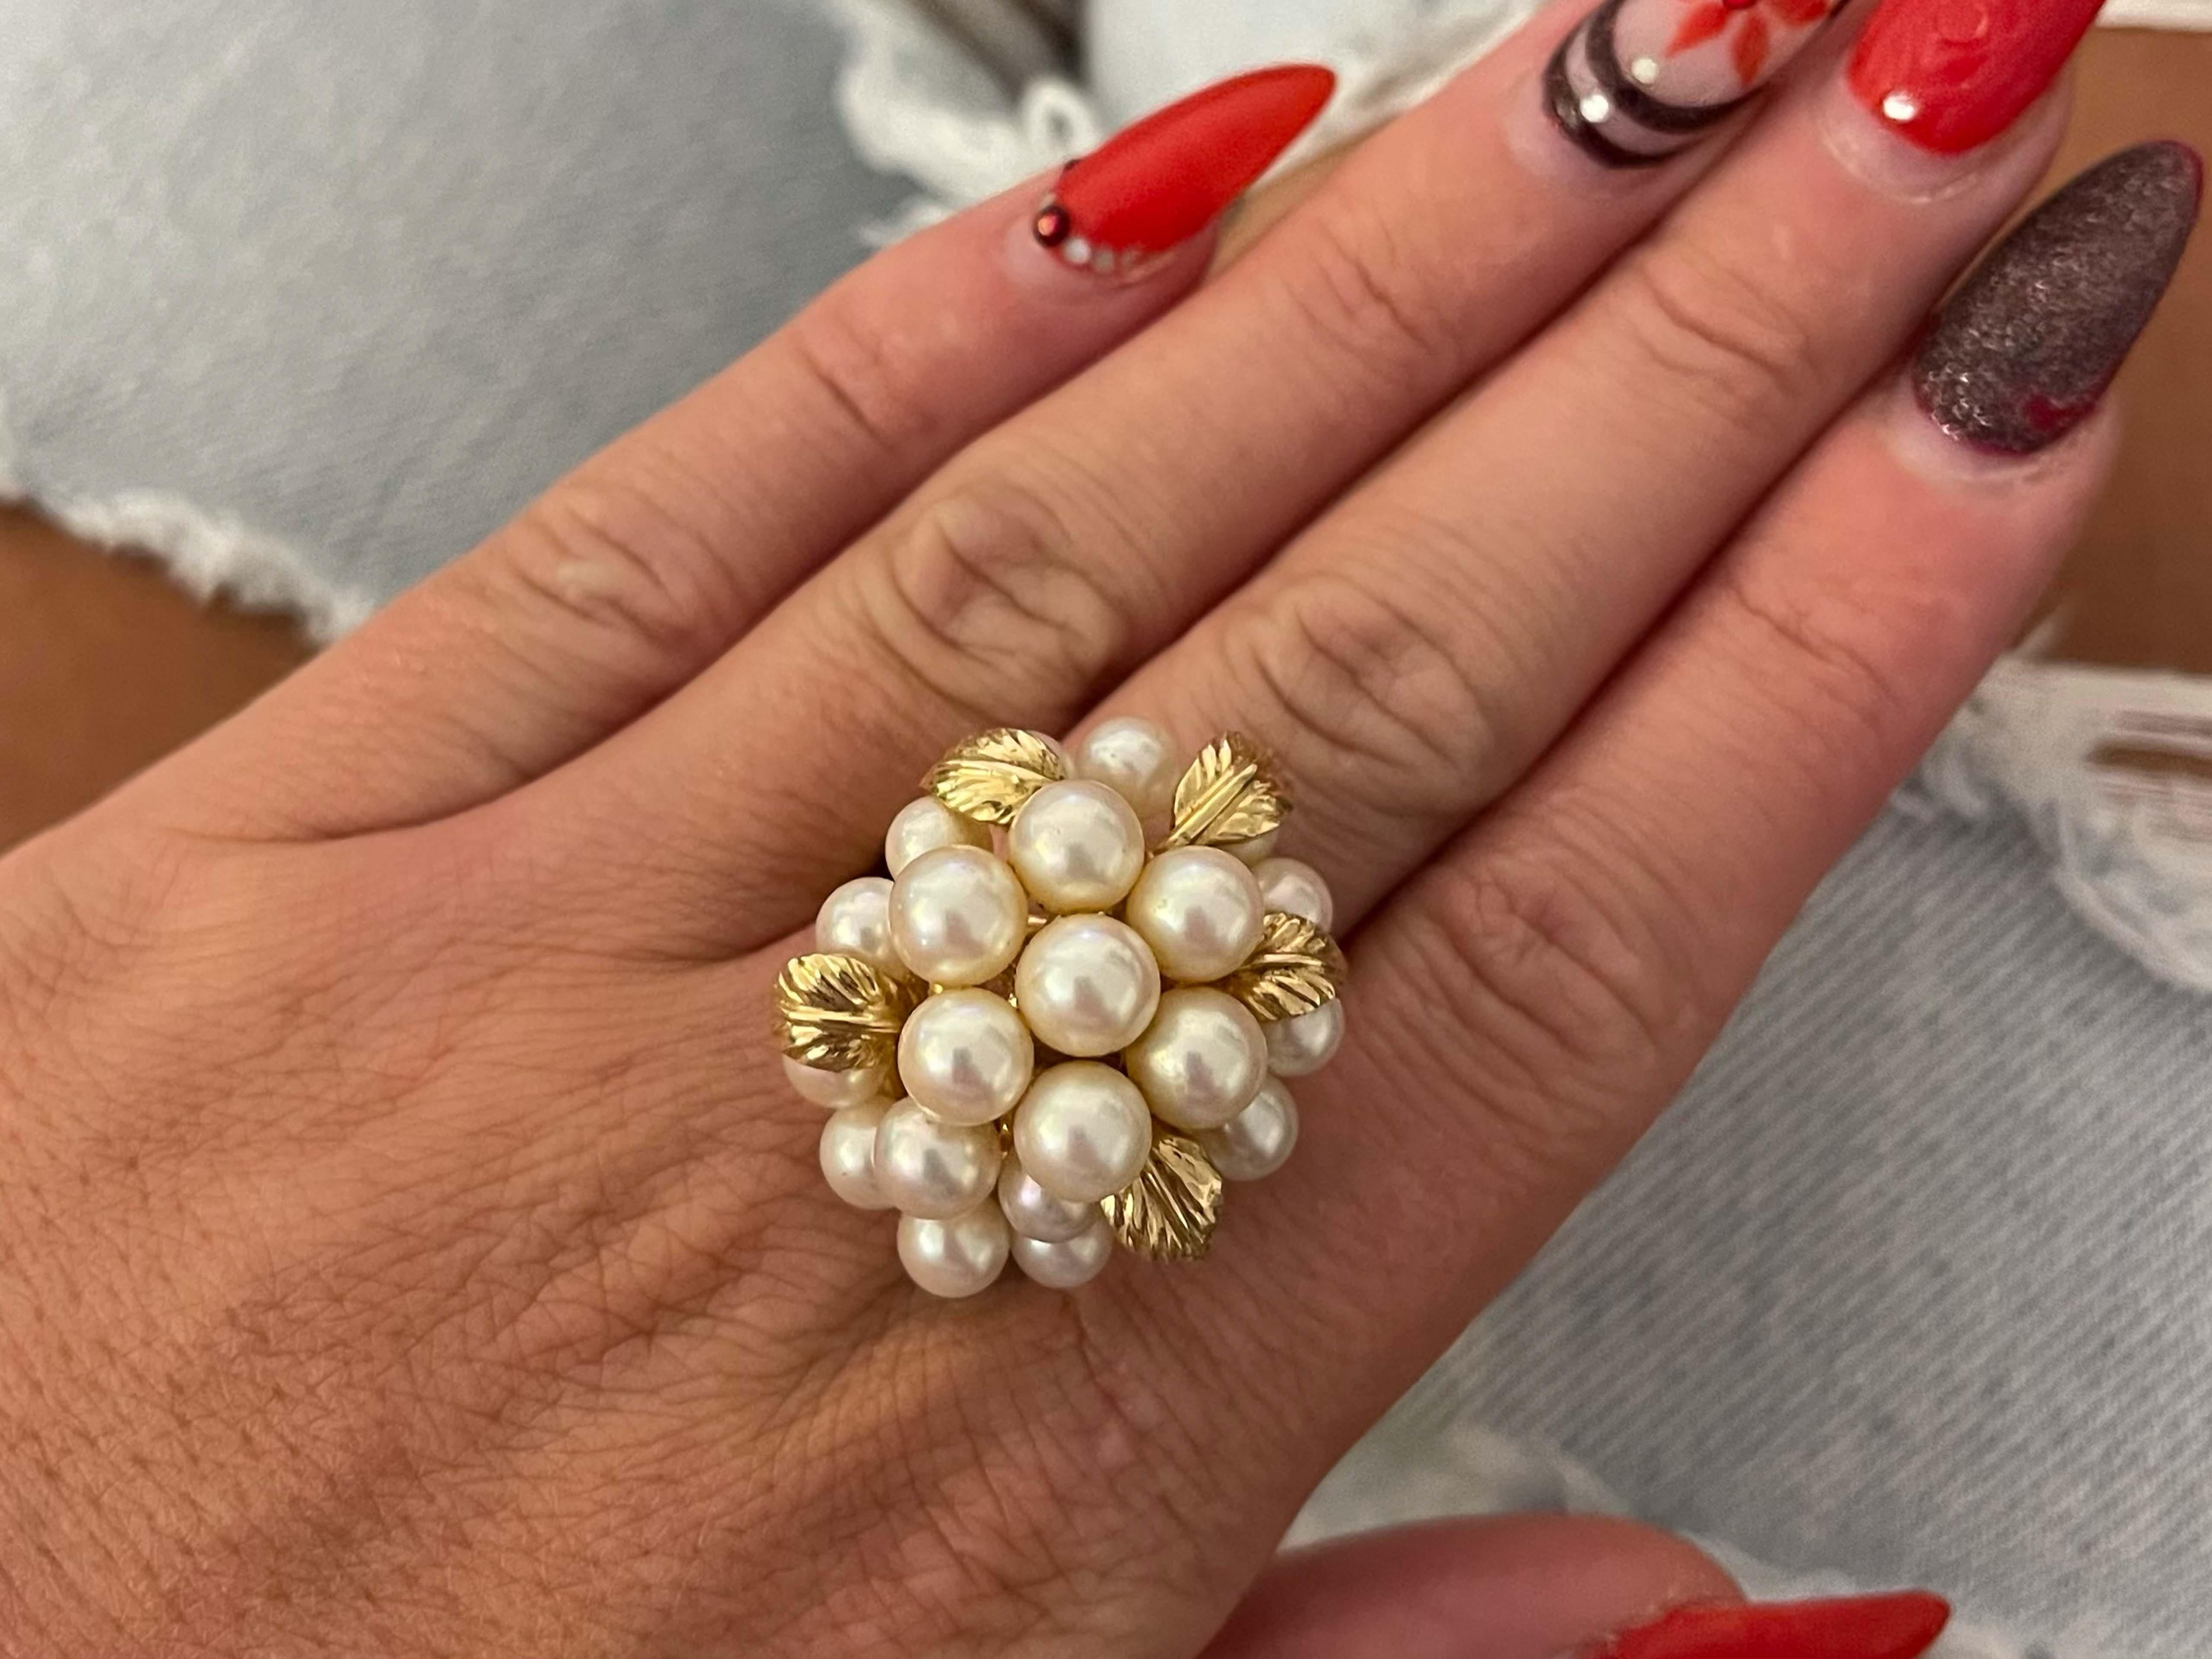 Item Specifications:

Metal: 14K Yellow Gold

Style: Statement Ring

Ring Size: 8 (resizing available for a fee)

Total Weight: 11.3 Grams

Ring Height: 1.10